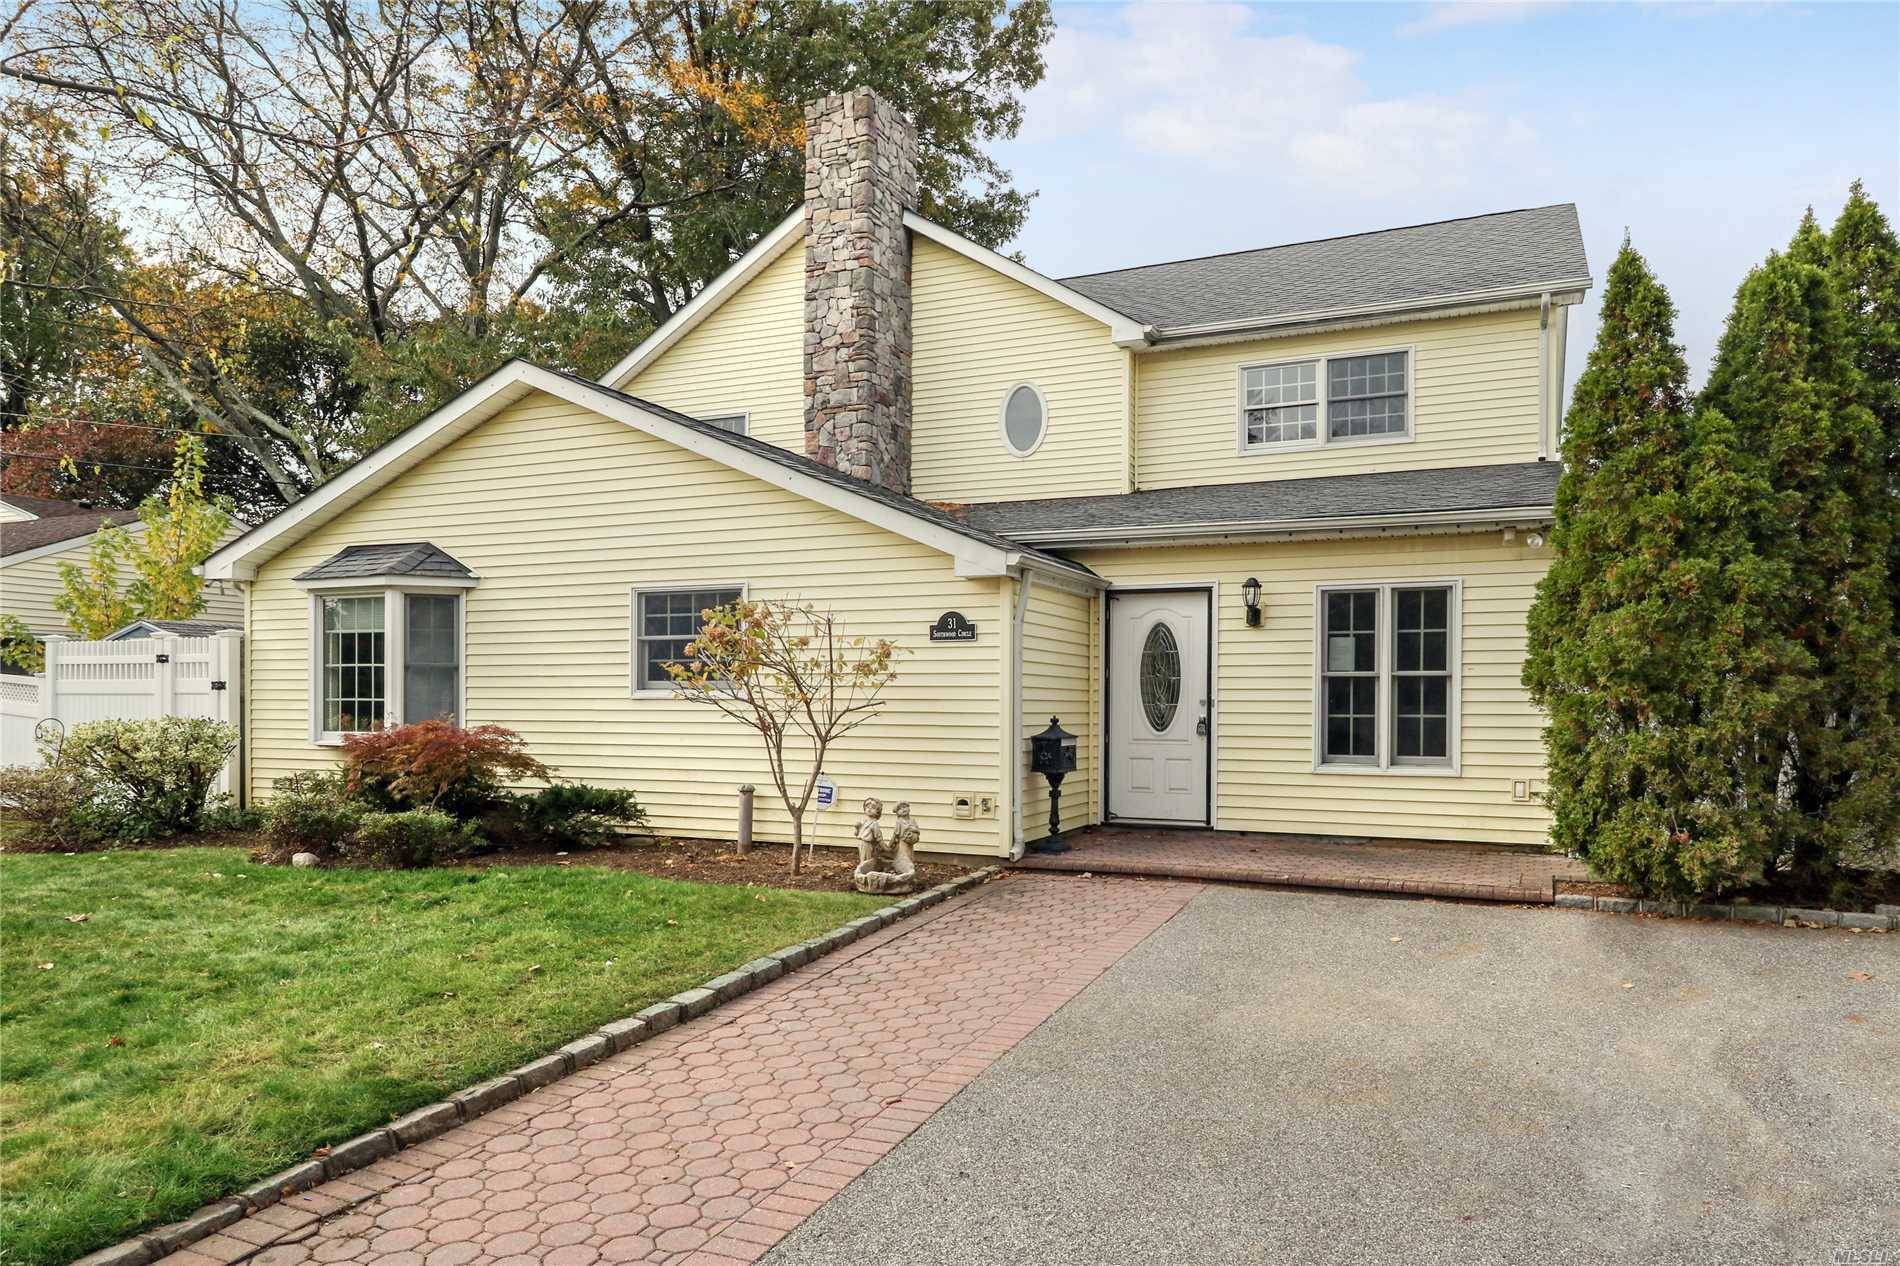 Colonial Updated With Six Bedrooms, Three Baths, And Two Family Rooms.